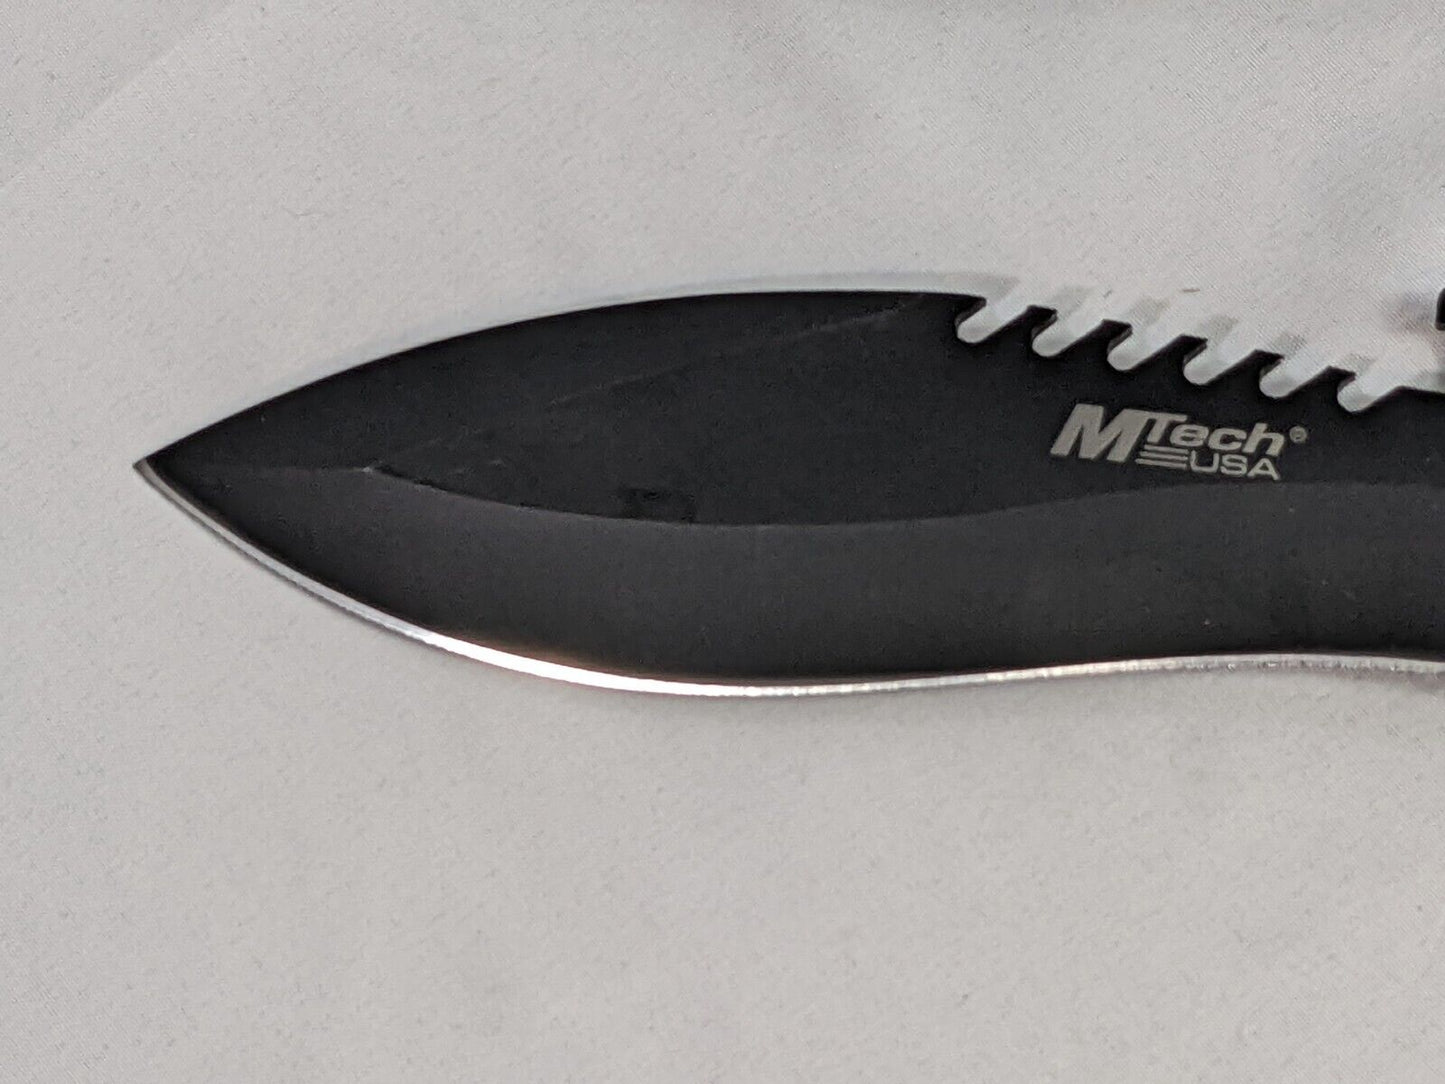 MTech USA Hunting Knife Fixed Blade Bowie Style Stainless Steel Black MT-20-12